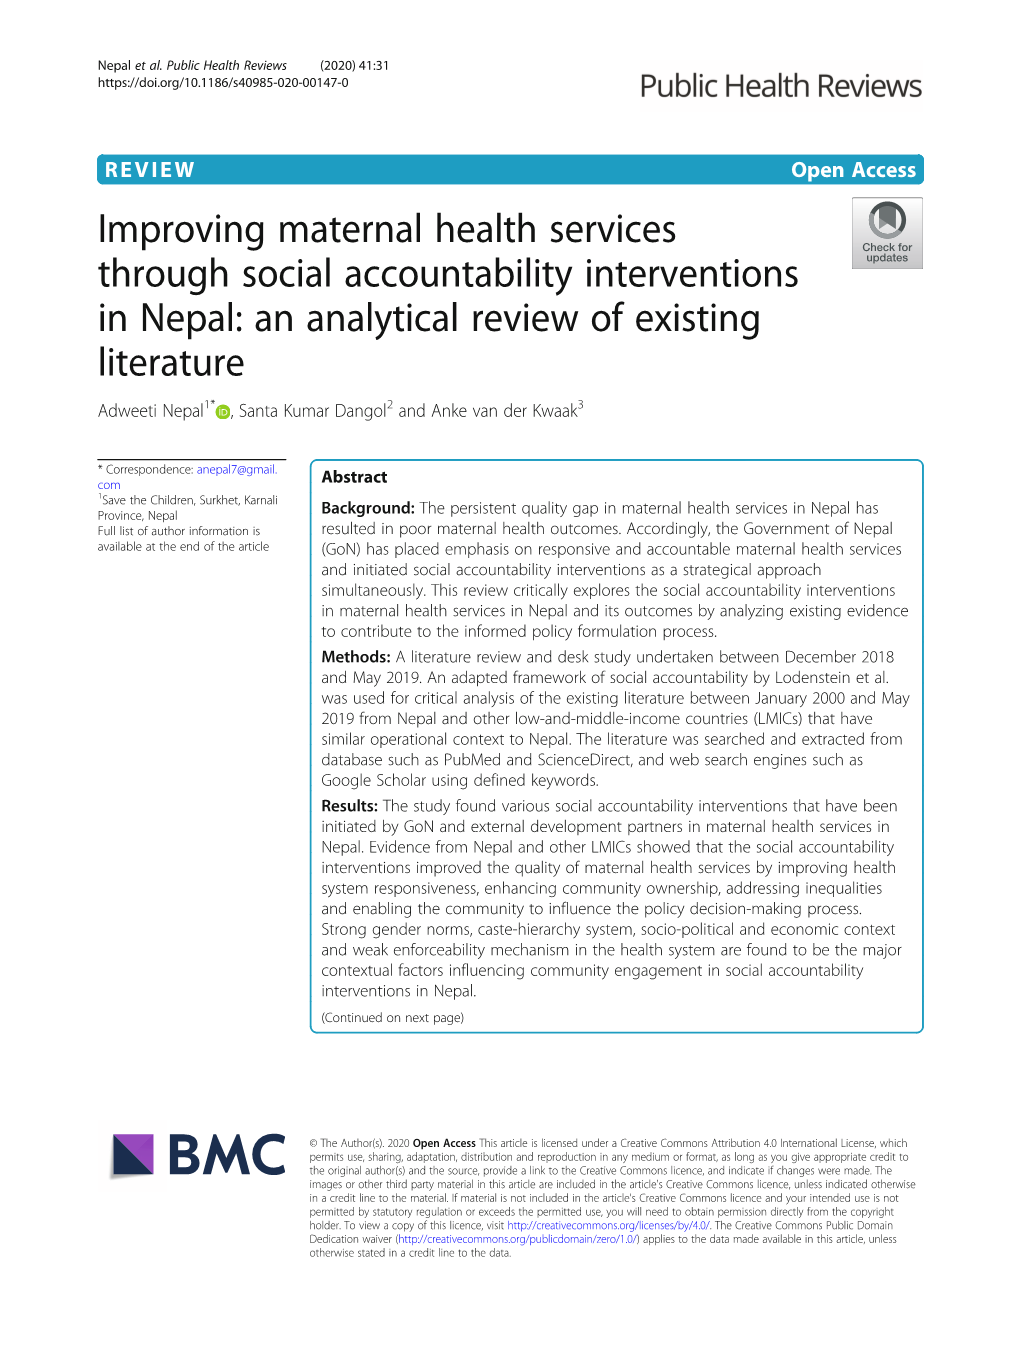 Improving Maternal Health Services Through Social Accountability Interventions in Nepal: an Analytical Review of Existing Litera